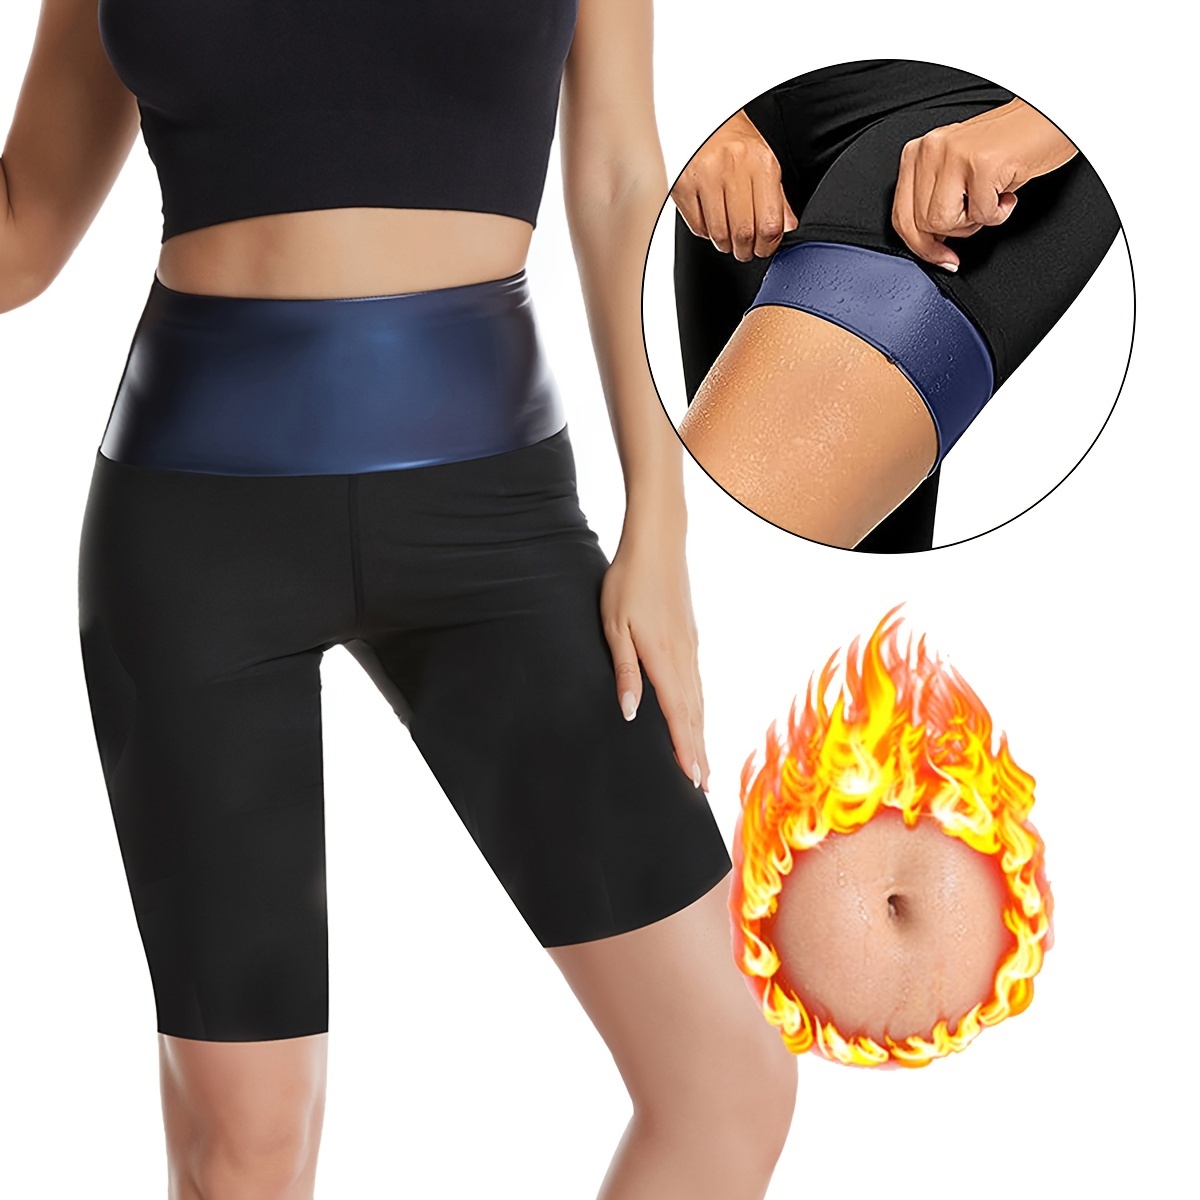 High Waist Slimming Leggings, Super Soft & Stretchy Butt Shaping Yoga Pants  With Control Top Waist, Women's Lingerie & Shapewear